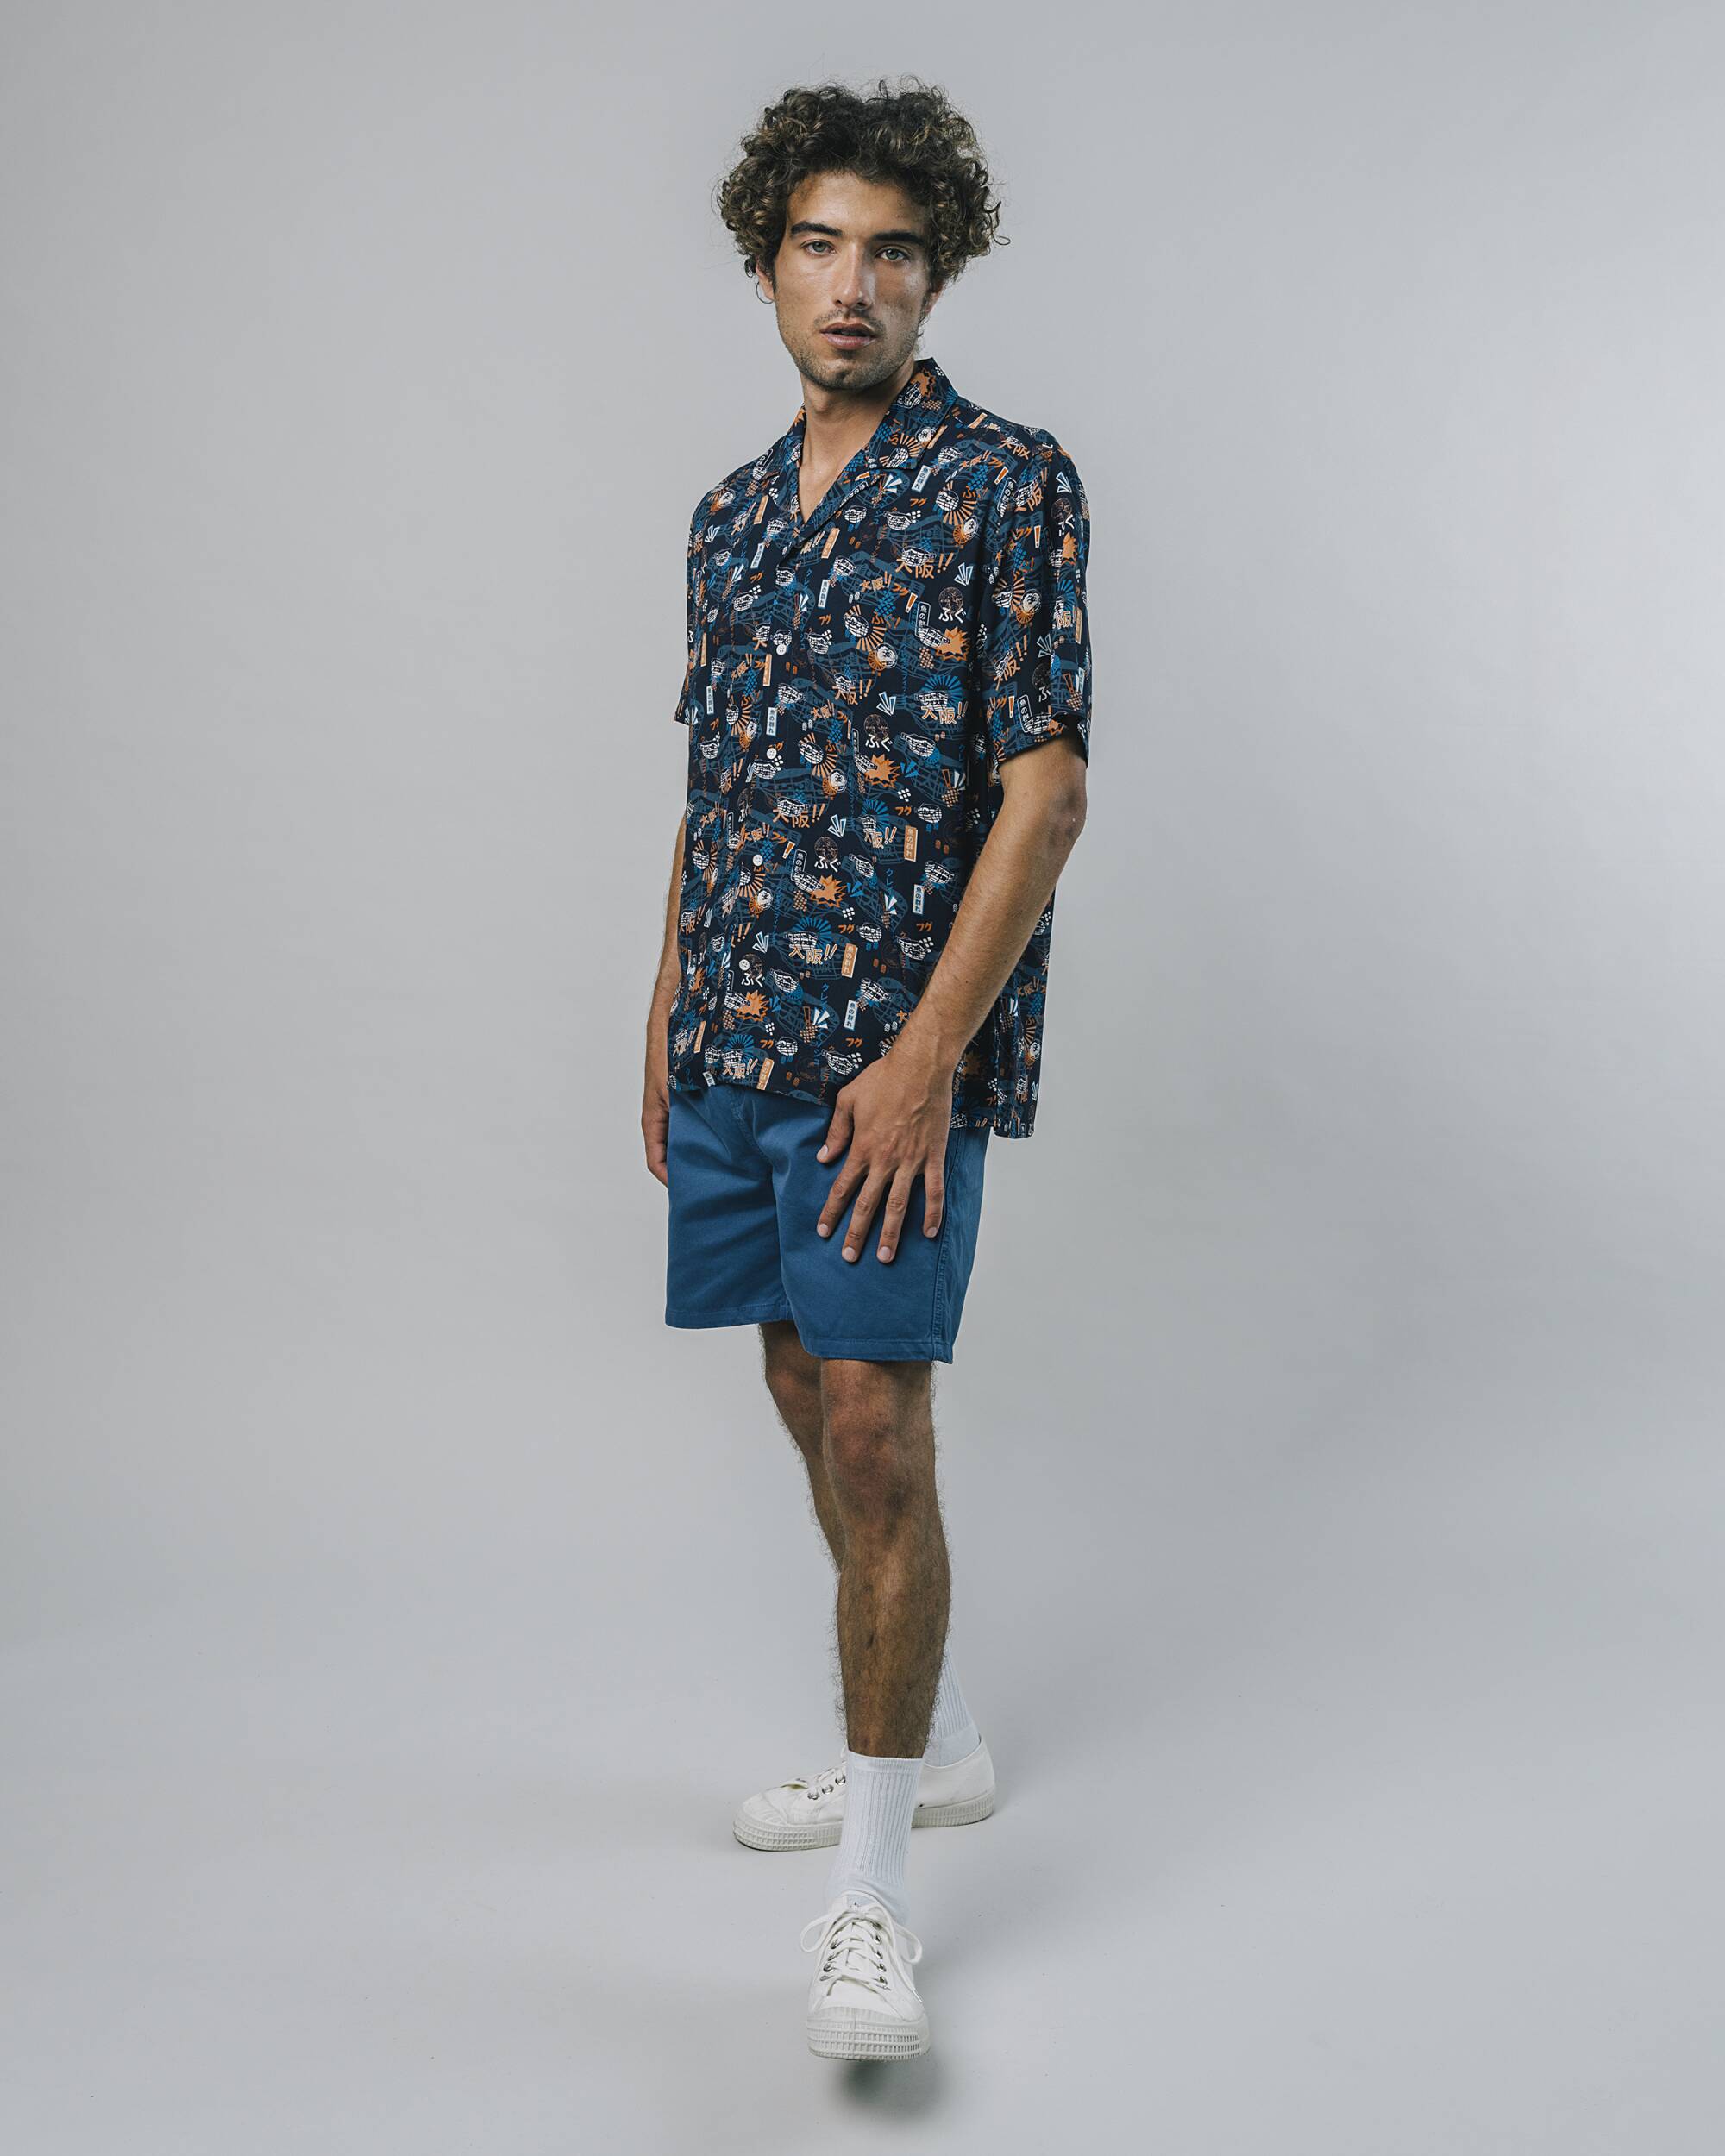 Short-sleeved shirt "Crazy Fugu" in blue with a great print made from 100% Ecovero from Brava Fabrics